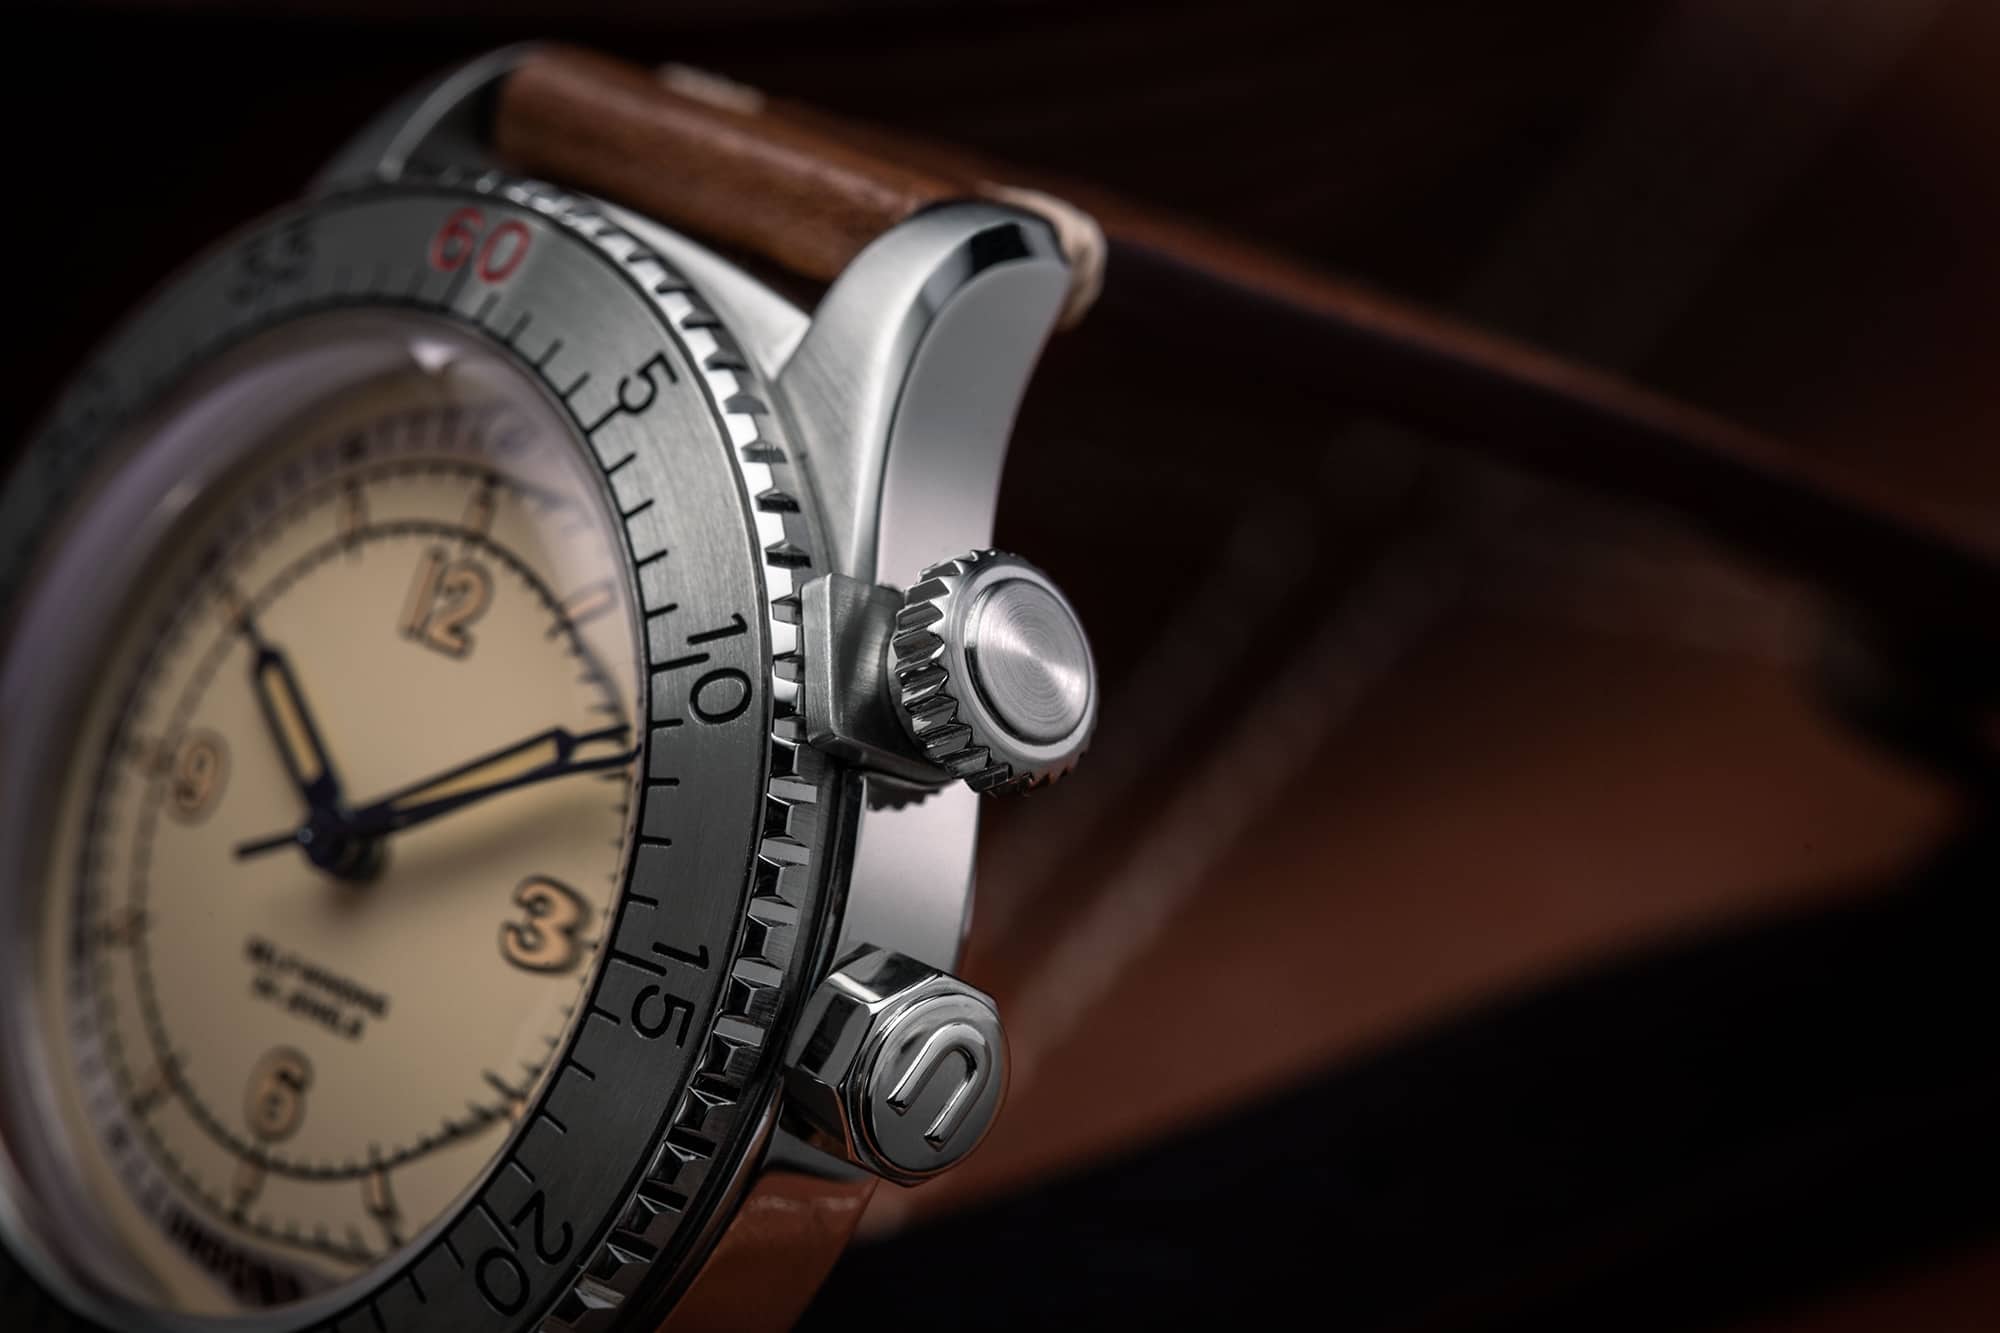 The Undone Aero Adds a Rotating and Locking Bezel to the Familiar Aviation Watch Format